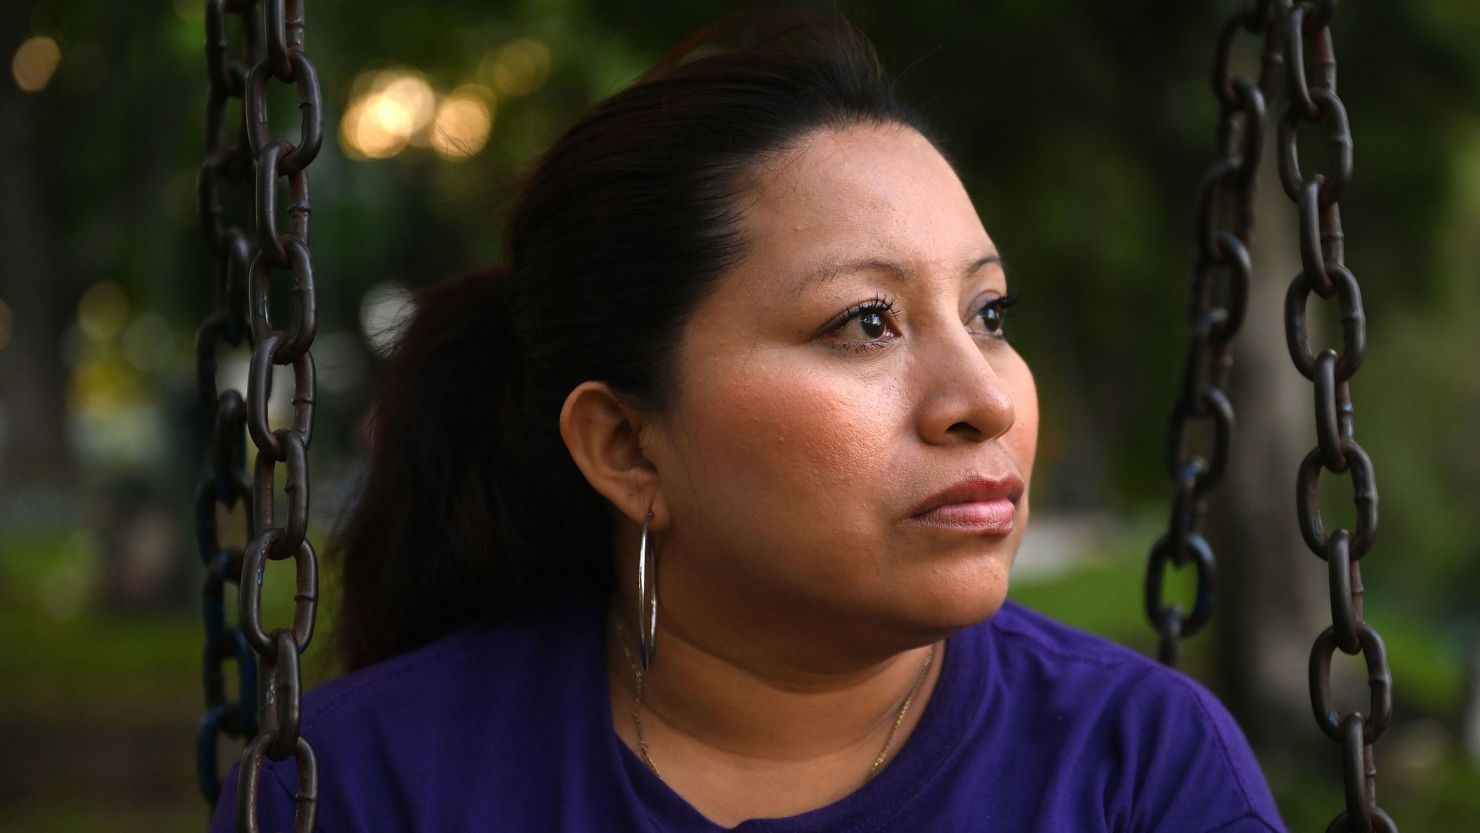 Salvadorean Teodora Vasquez -who served a sentence handed under draconian anti-abortion laws after suffering a miscarriage- poses during an interview with AFP in San Salvador on September 12, 2019, - Vasquez will present a documentary film recreating the trauma suffered by women sentenced to years of jail after obstetric emergencies under El Salvador's anti-abortion laws. The world premiere will take place in Sweden between September 23 and 25, 2019. (Photo by Marvin RECINOS / AFP)        (Photo credit should read MARVIN RECINOS/AFP via Getty Images)